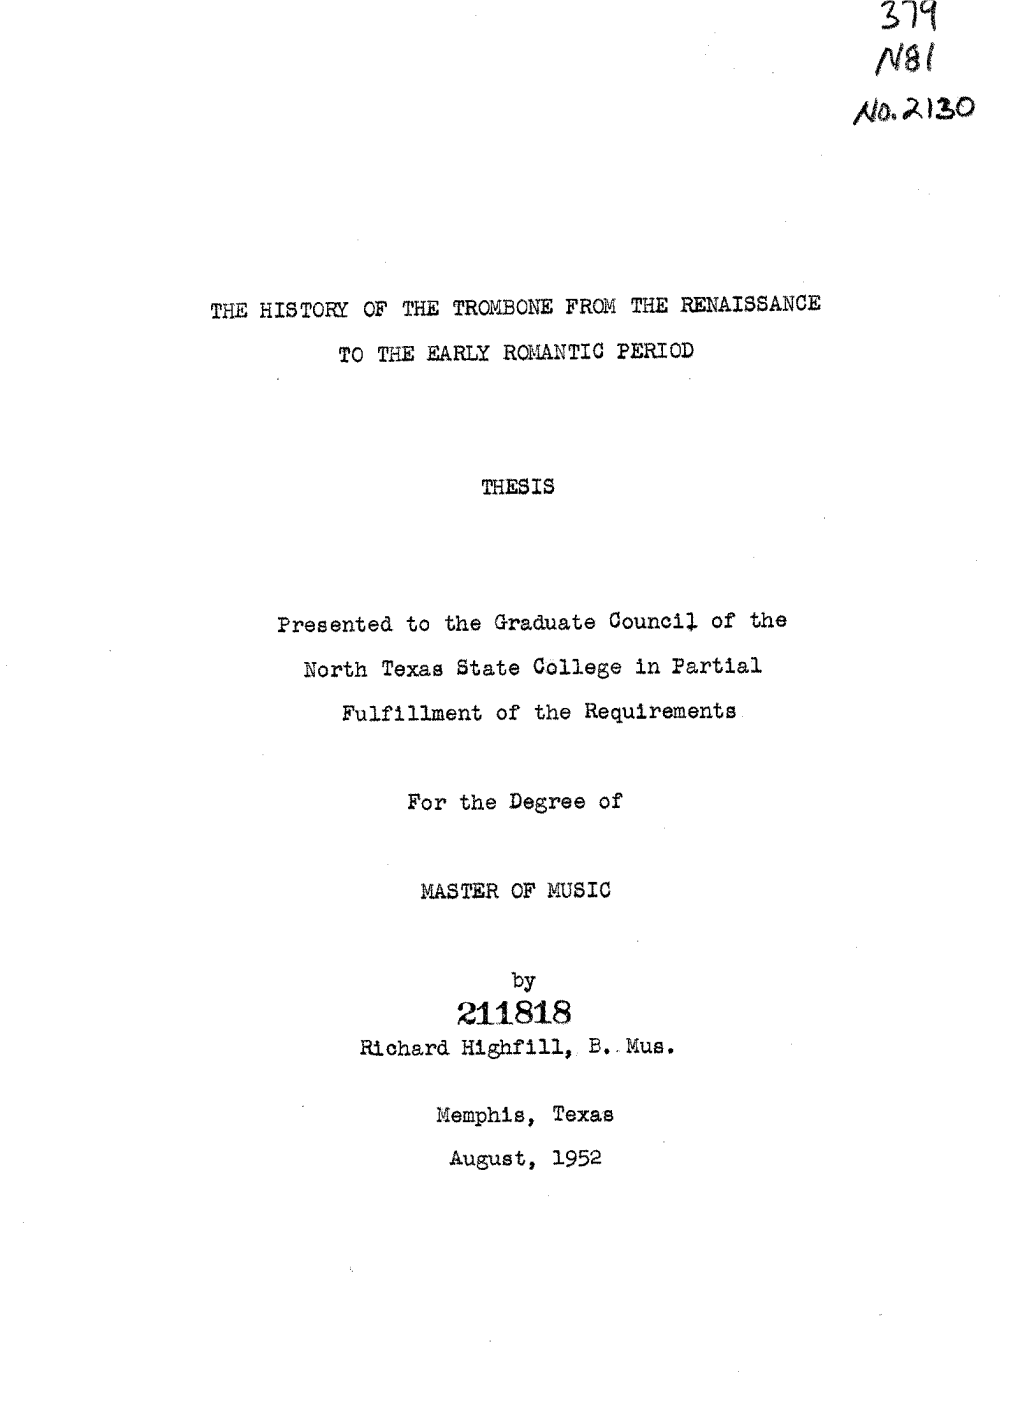 For the Degree of MASTER of MUSIC by Richard Highfill, B. Mus. Memphis, Texas August, 1952